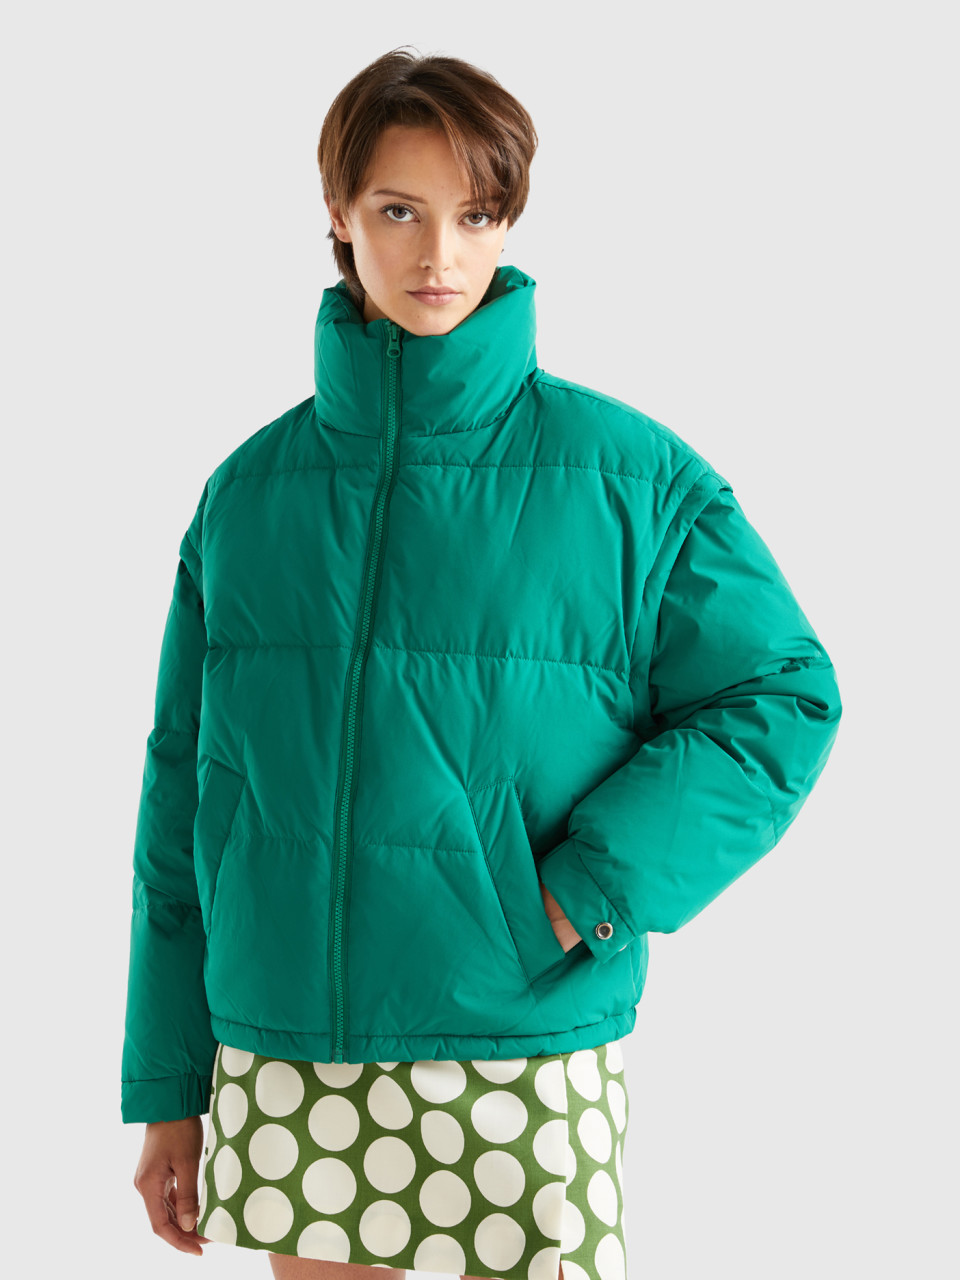 Benetton, Short Padded Jacket With Removable Sleeves, Green, Women